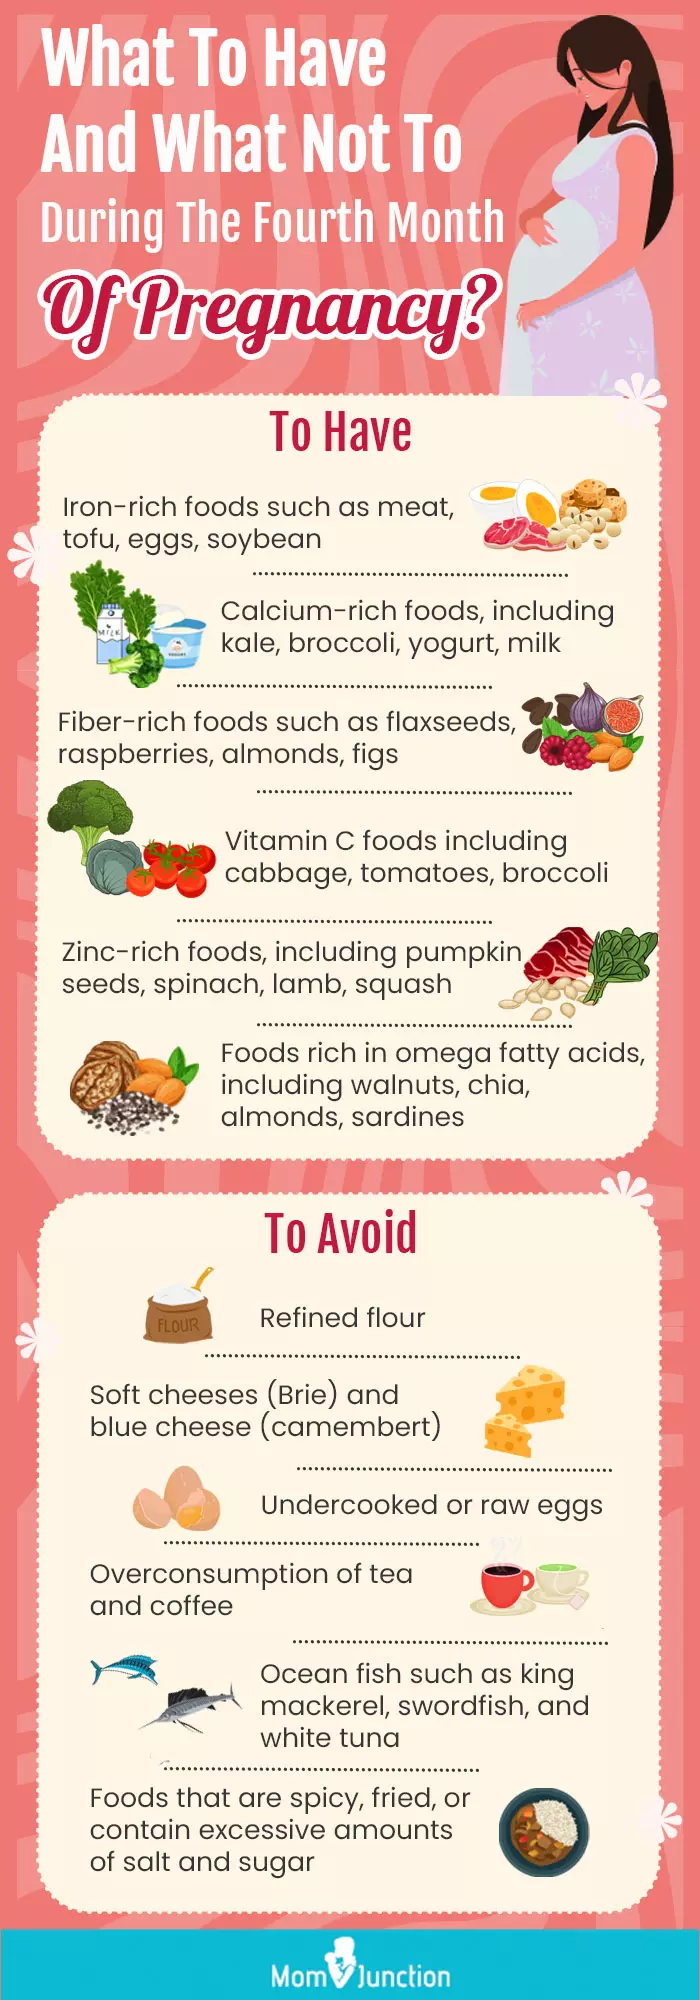 what to have and what not to during the fourth month of pregnancy (infographic)